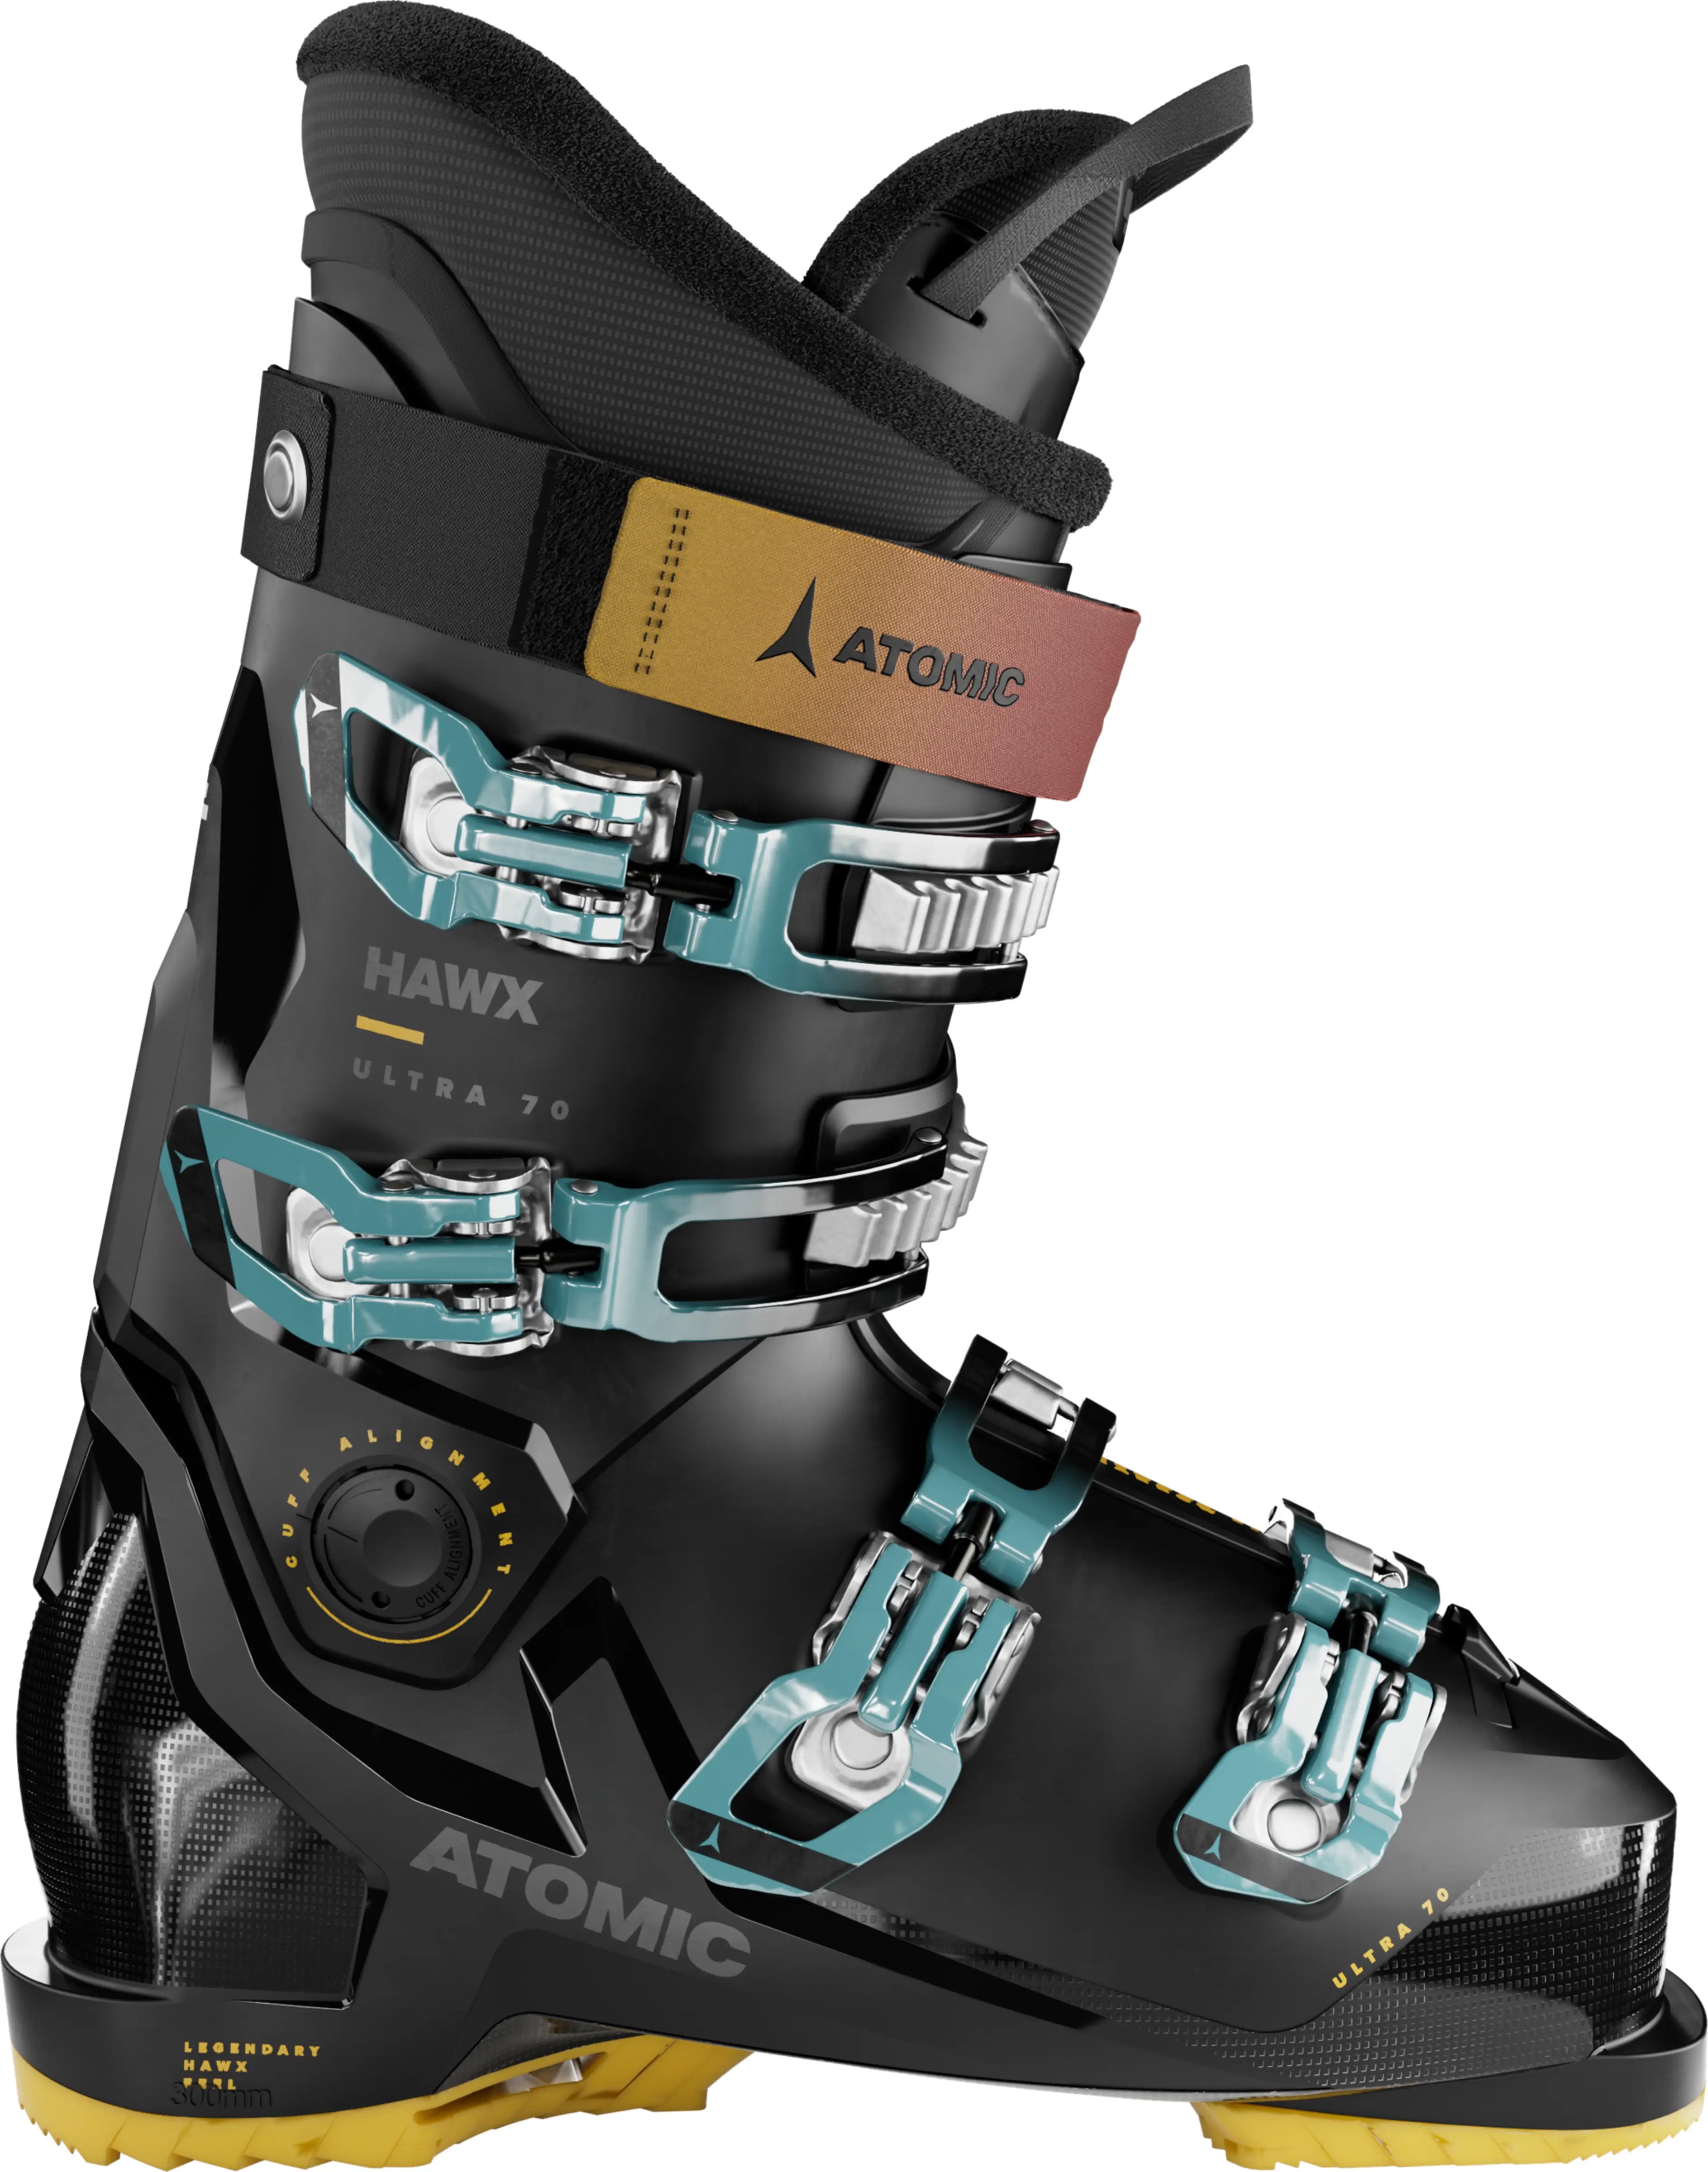 The Atomic Hawx Ultra 70 LC GW is a next-level, all-mountain ski boot for advancing teenagers and young adults seeking four-buckle performance and comfort.